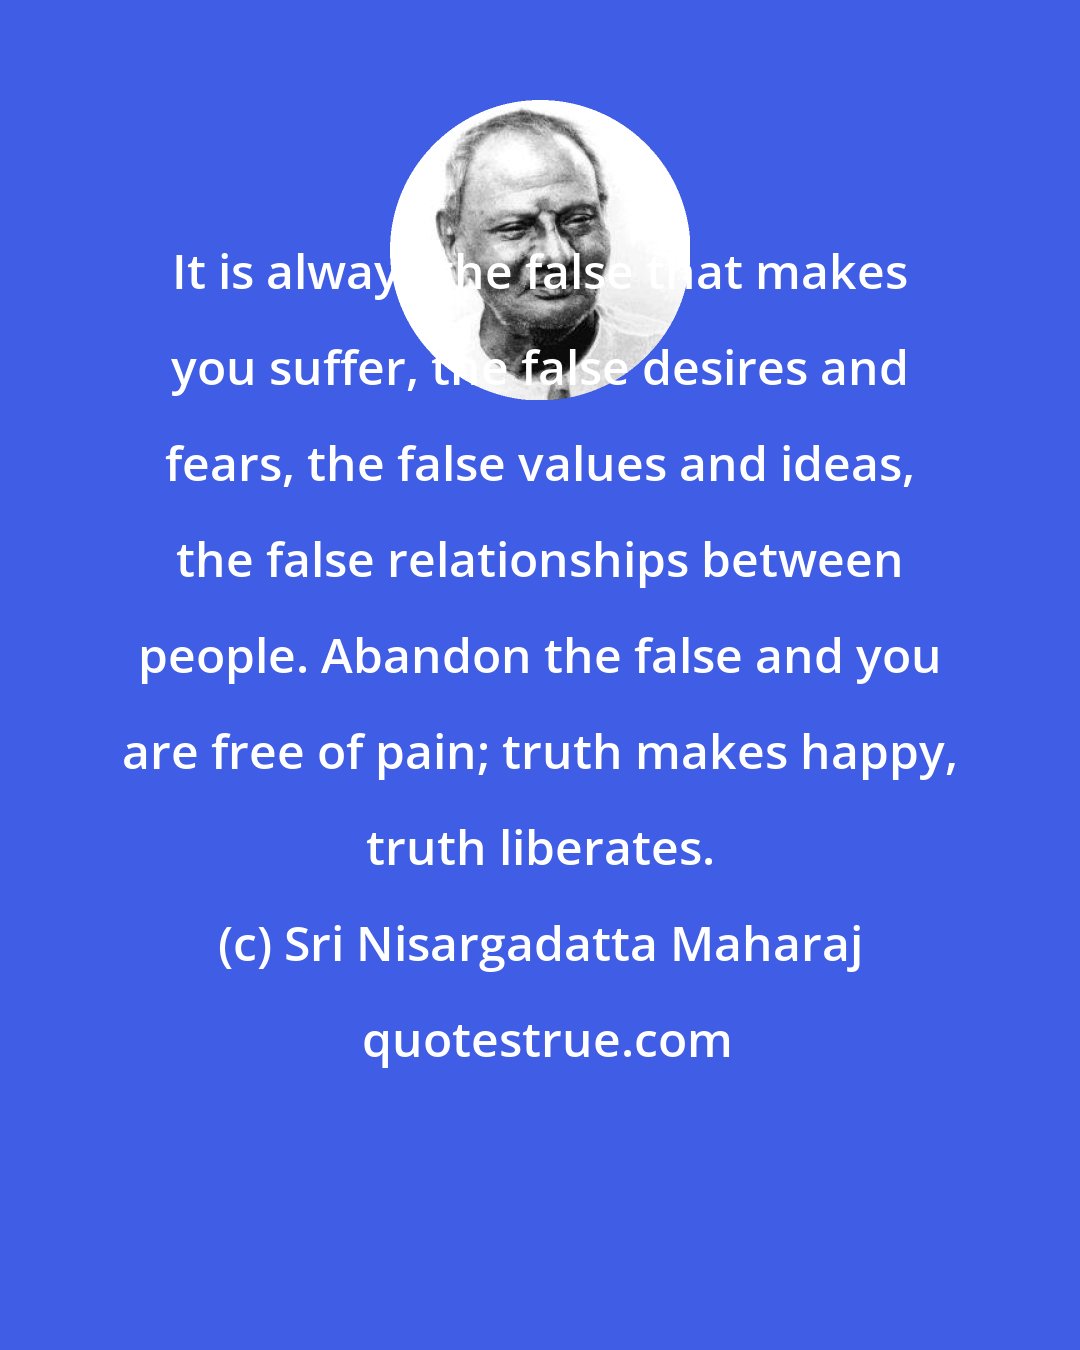 Sri Nisargadatta Maharaj: It is always the false that makes you suffer, the false desires and fears, the false values and ideas, the false relationships between people. Abandon the false and you are free of pain; truth makes happy, truth liberates.